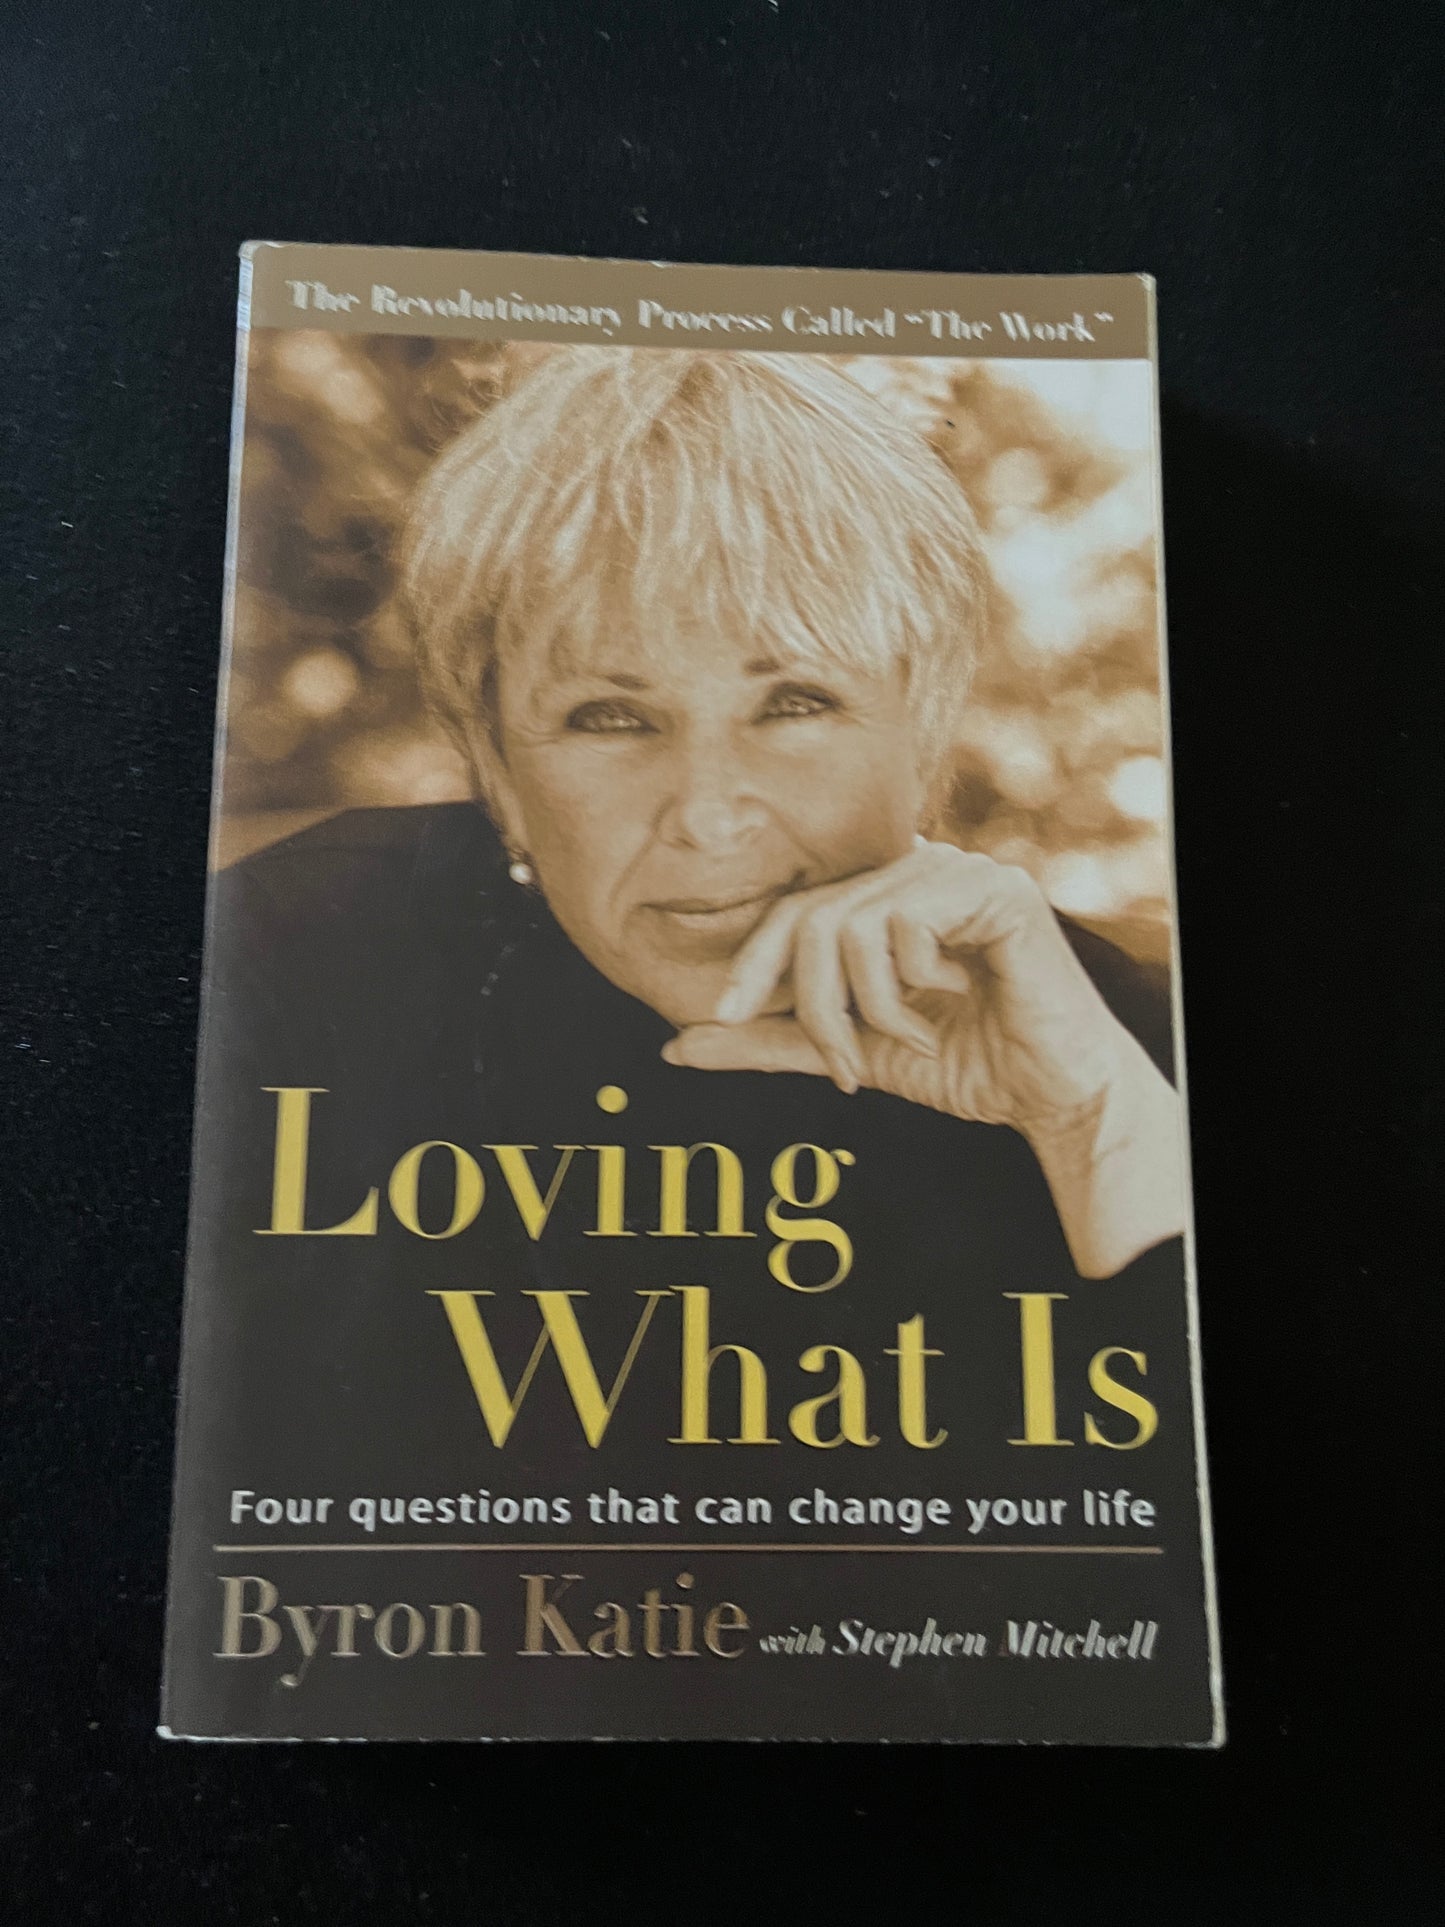 LOVIING WHAT IS: FOUR QUESTIONS THAT CAN CHANGE YOUR LIFE by Byron Katie